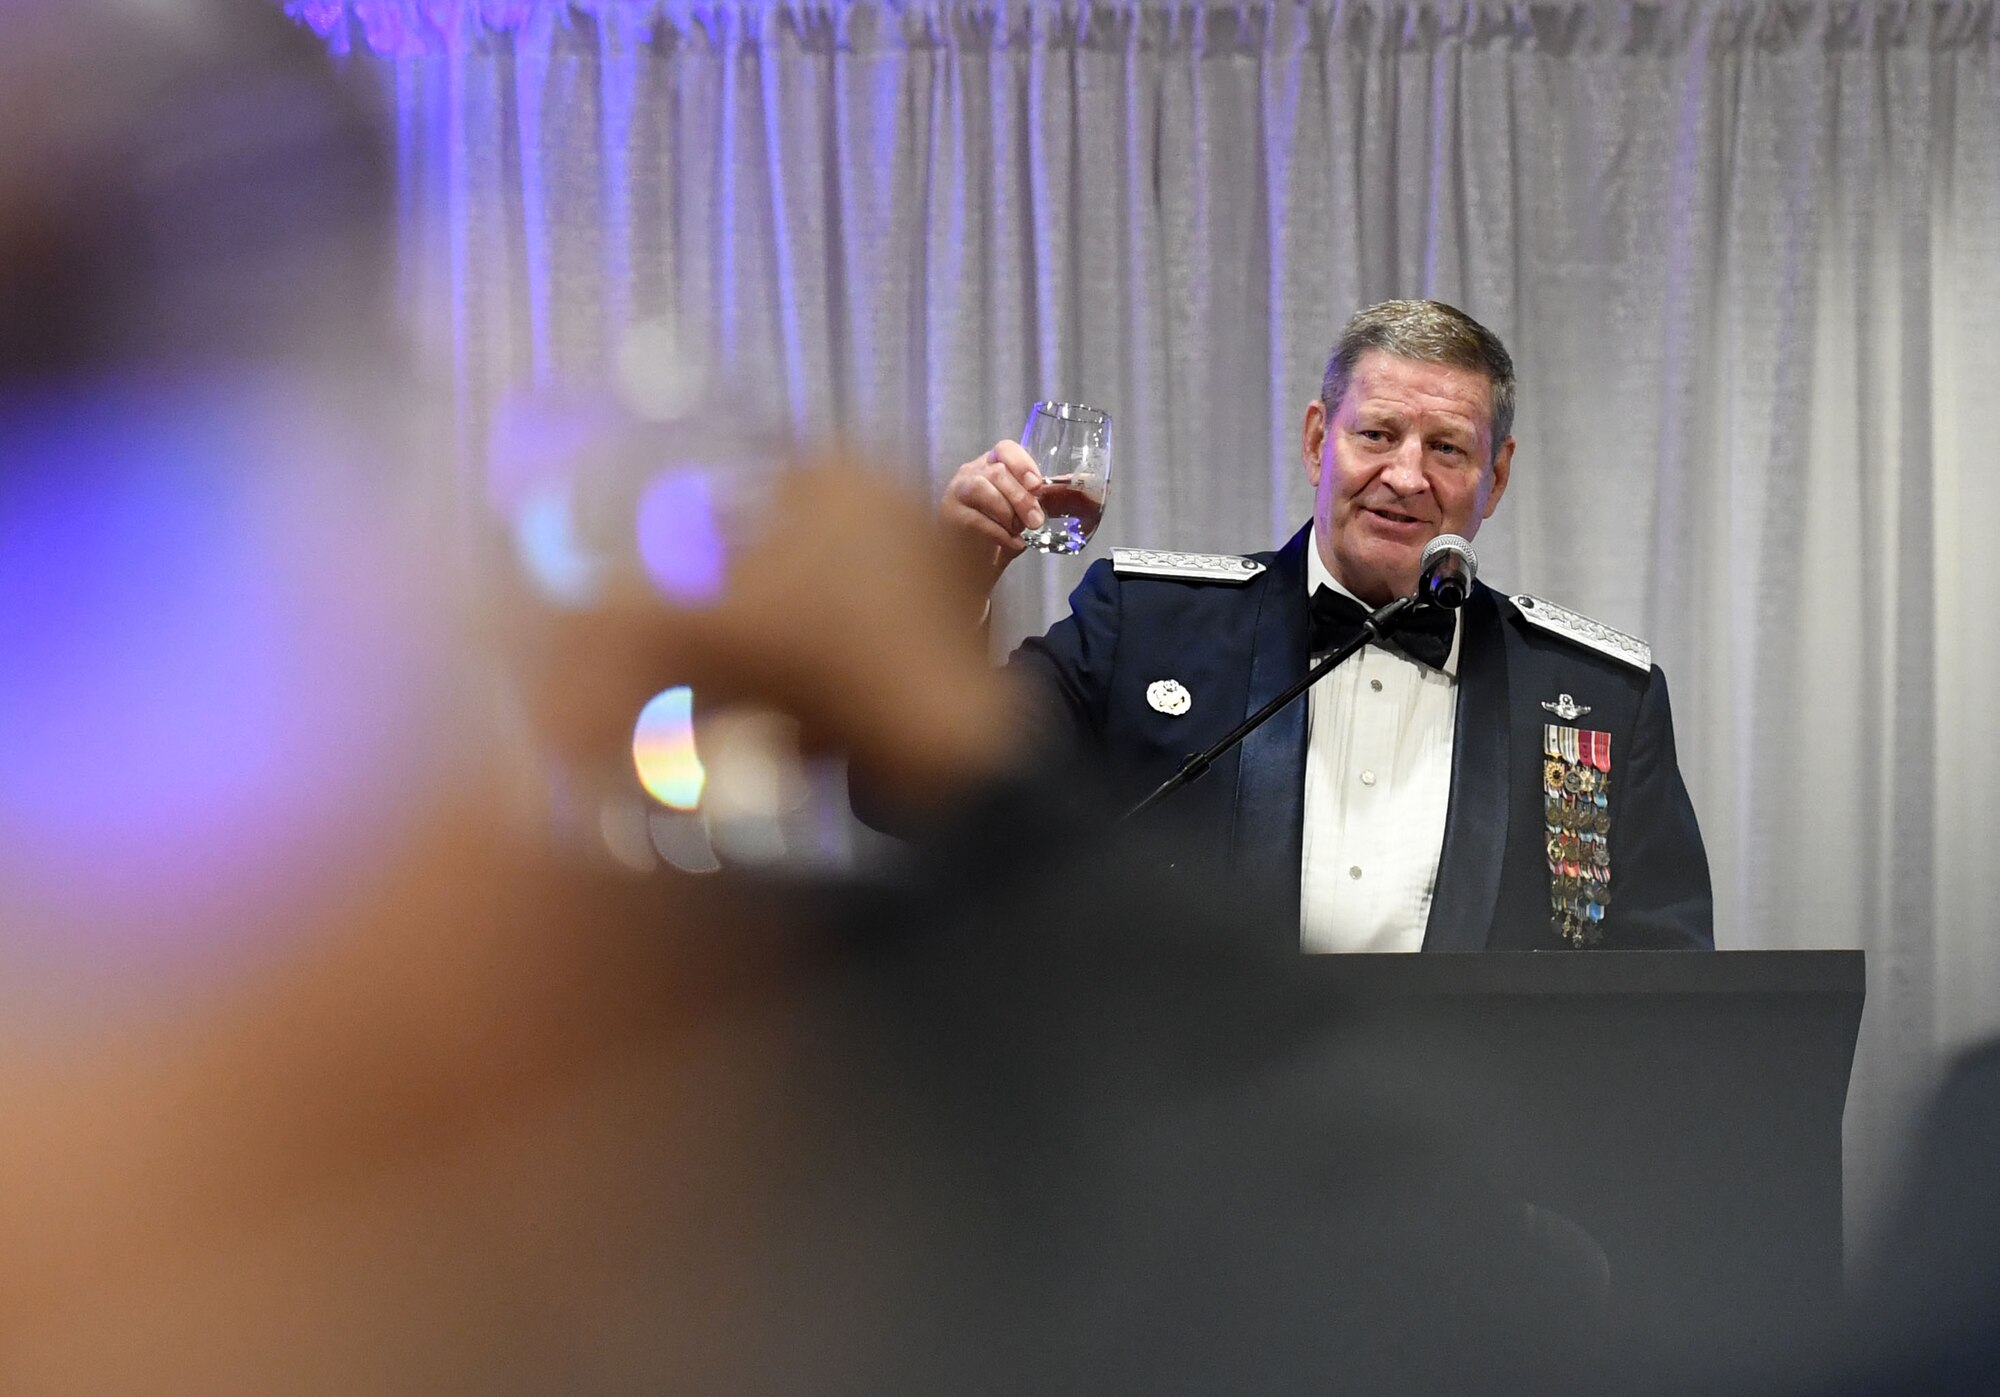 U.S. Air Force Retired General Robin Rand delivers a toast during the Keesler Air Force Ball inside the IP Casino Resort Spa at Biloxi, Mississippi, Sept. 17, 2022. The event, which celebrated the Air Force's 75th birthday, also included a cake cutting ceremony. (U.S. Air Force photo by Kemberly Groue)